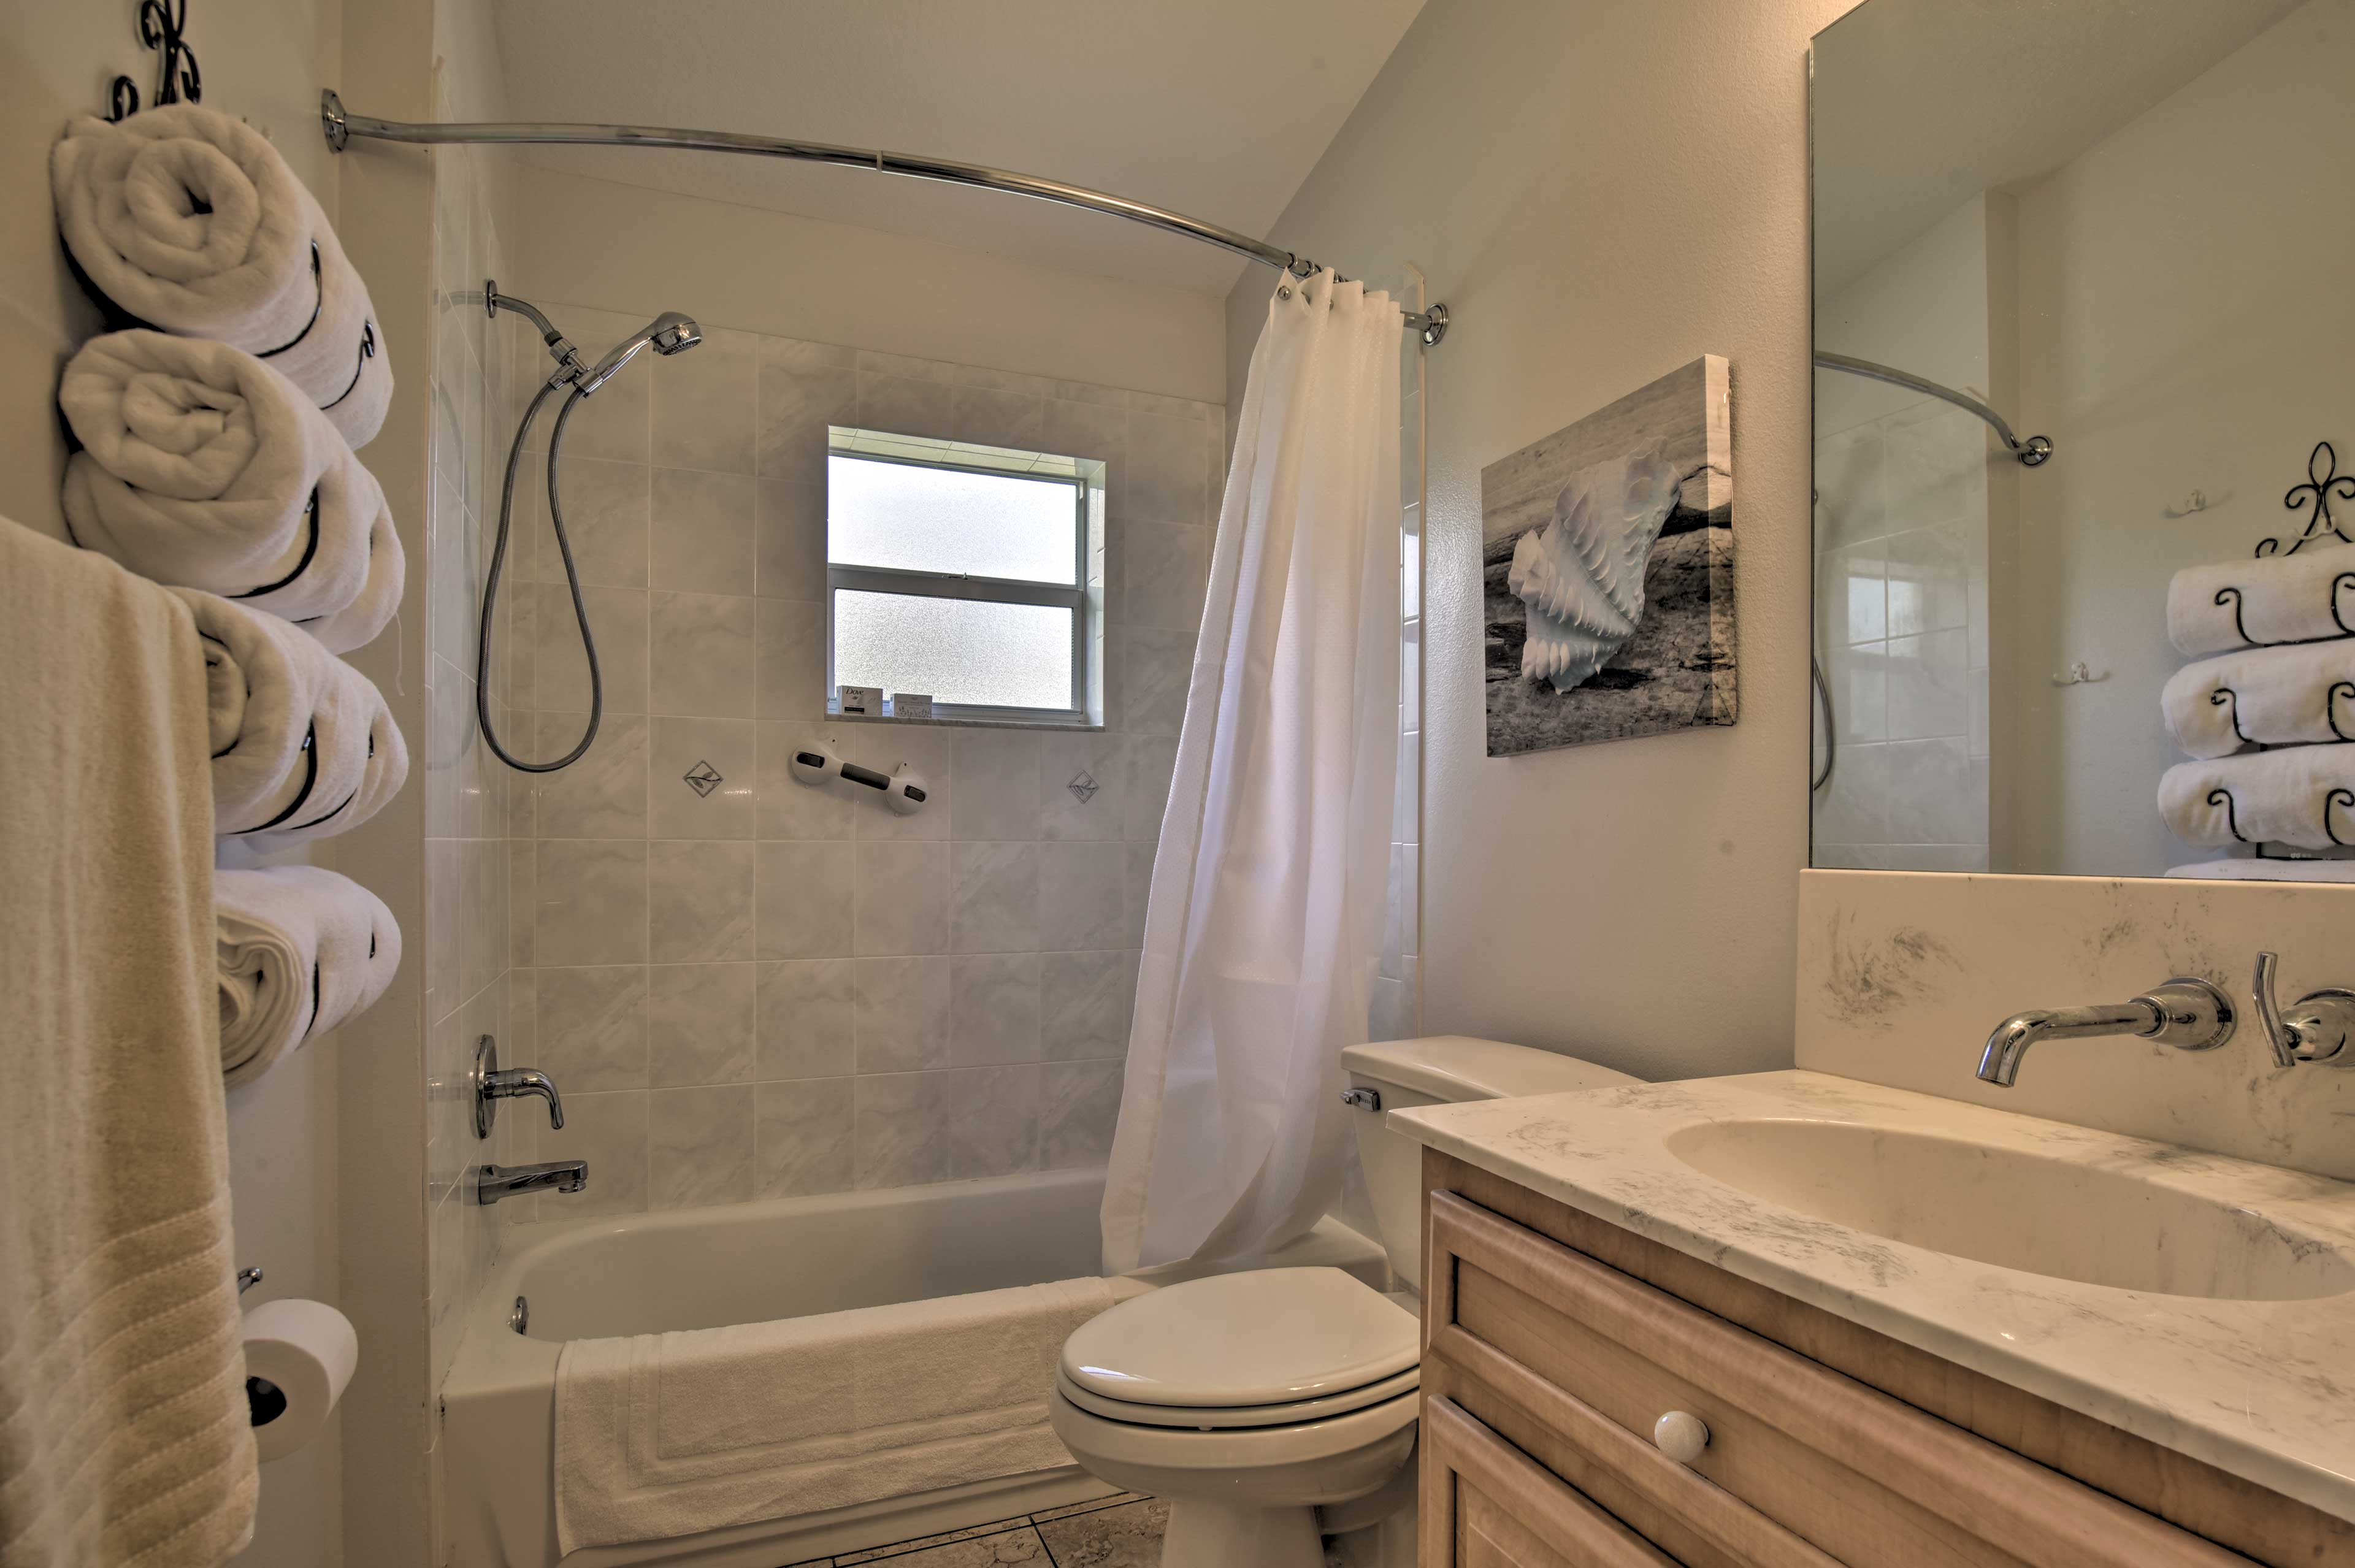 The full bath is equipped with a shower/tub combo.